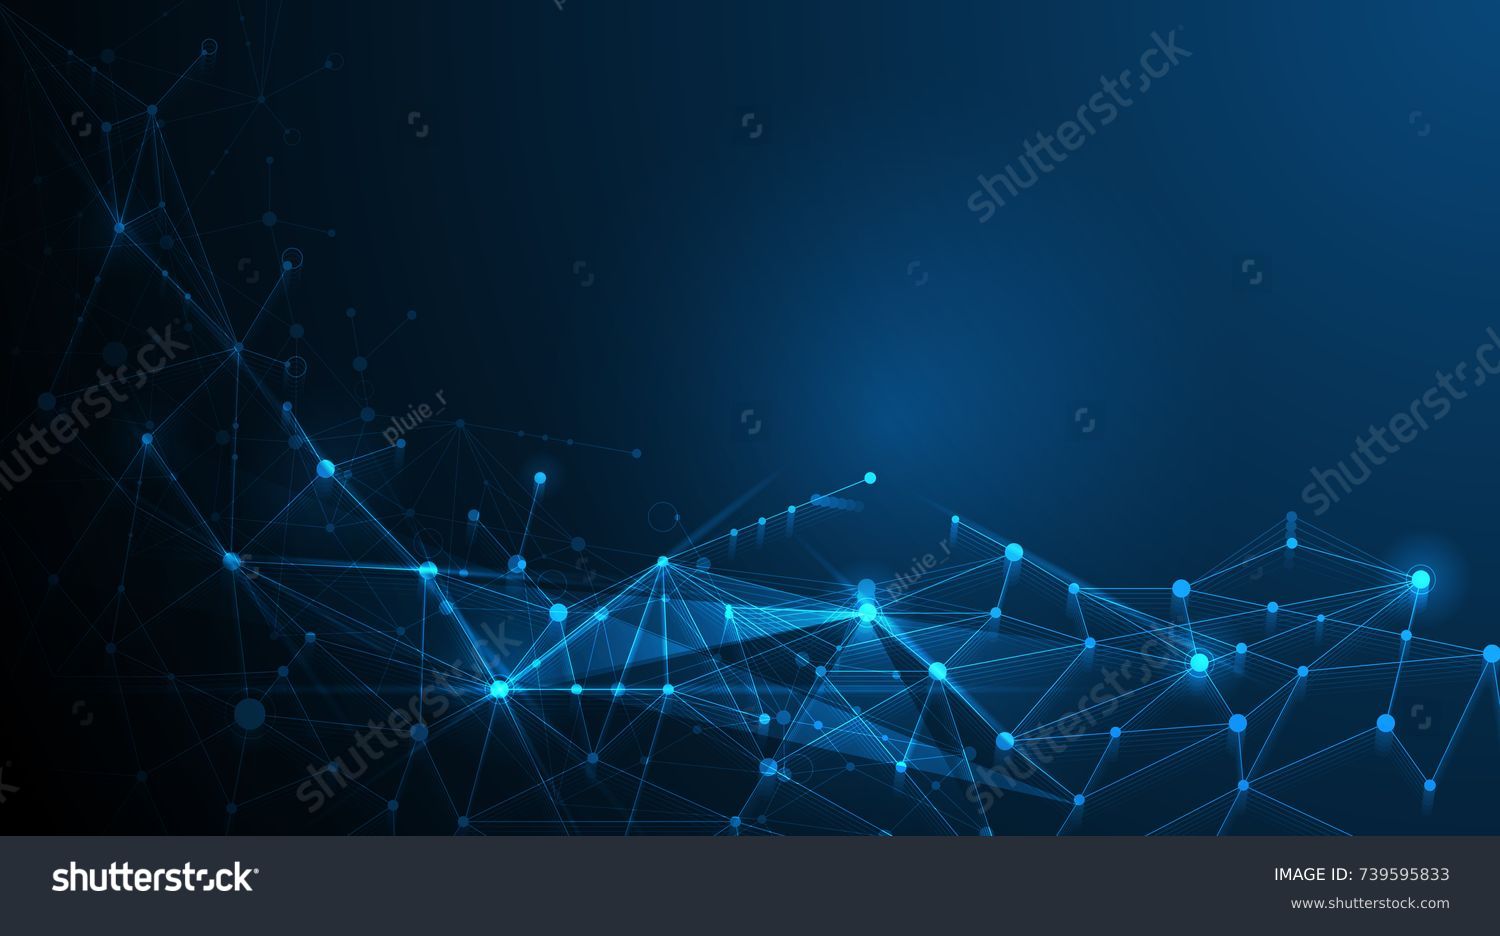 Abstract futuristic - Molecules technology with polygonal shapes on dark blue background. Illustration Vector design digital technology concept.  #739595833